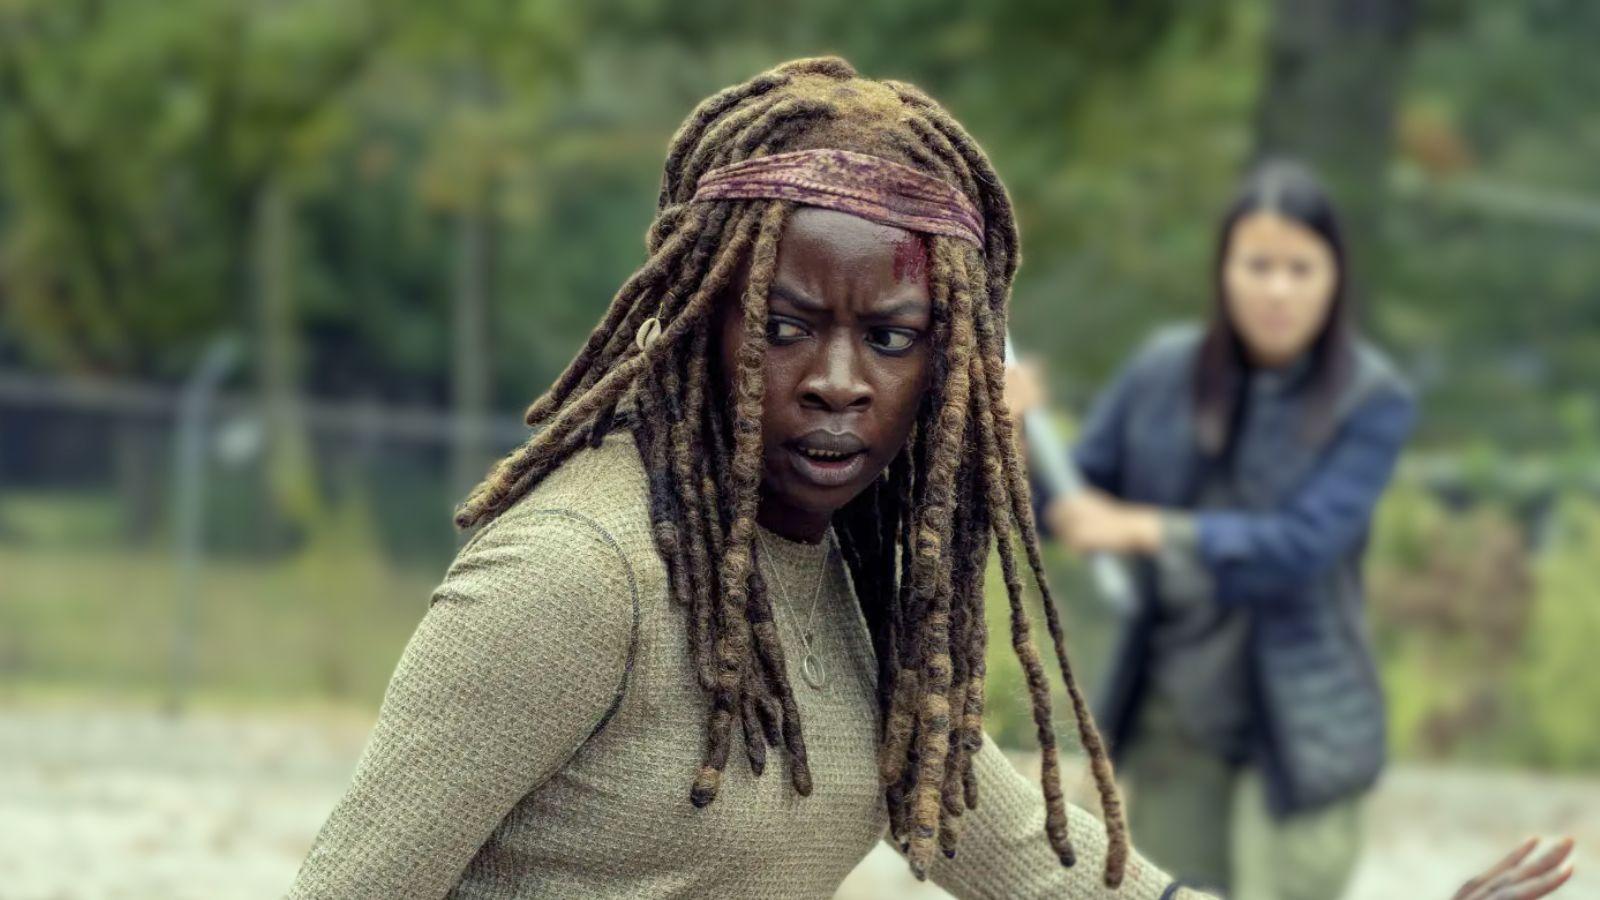 Michonne keeps an eye on her surroundings in The Walking Dead Season 9 Episode 14, as a young girl approaches her with a weapon drawn.